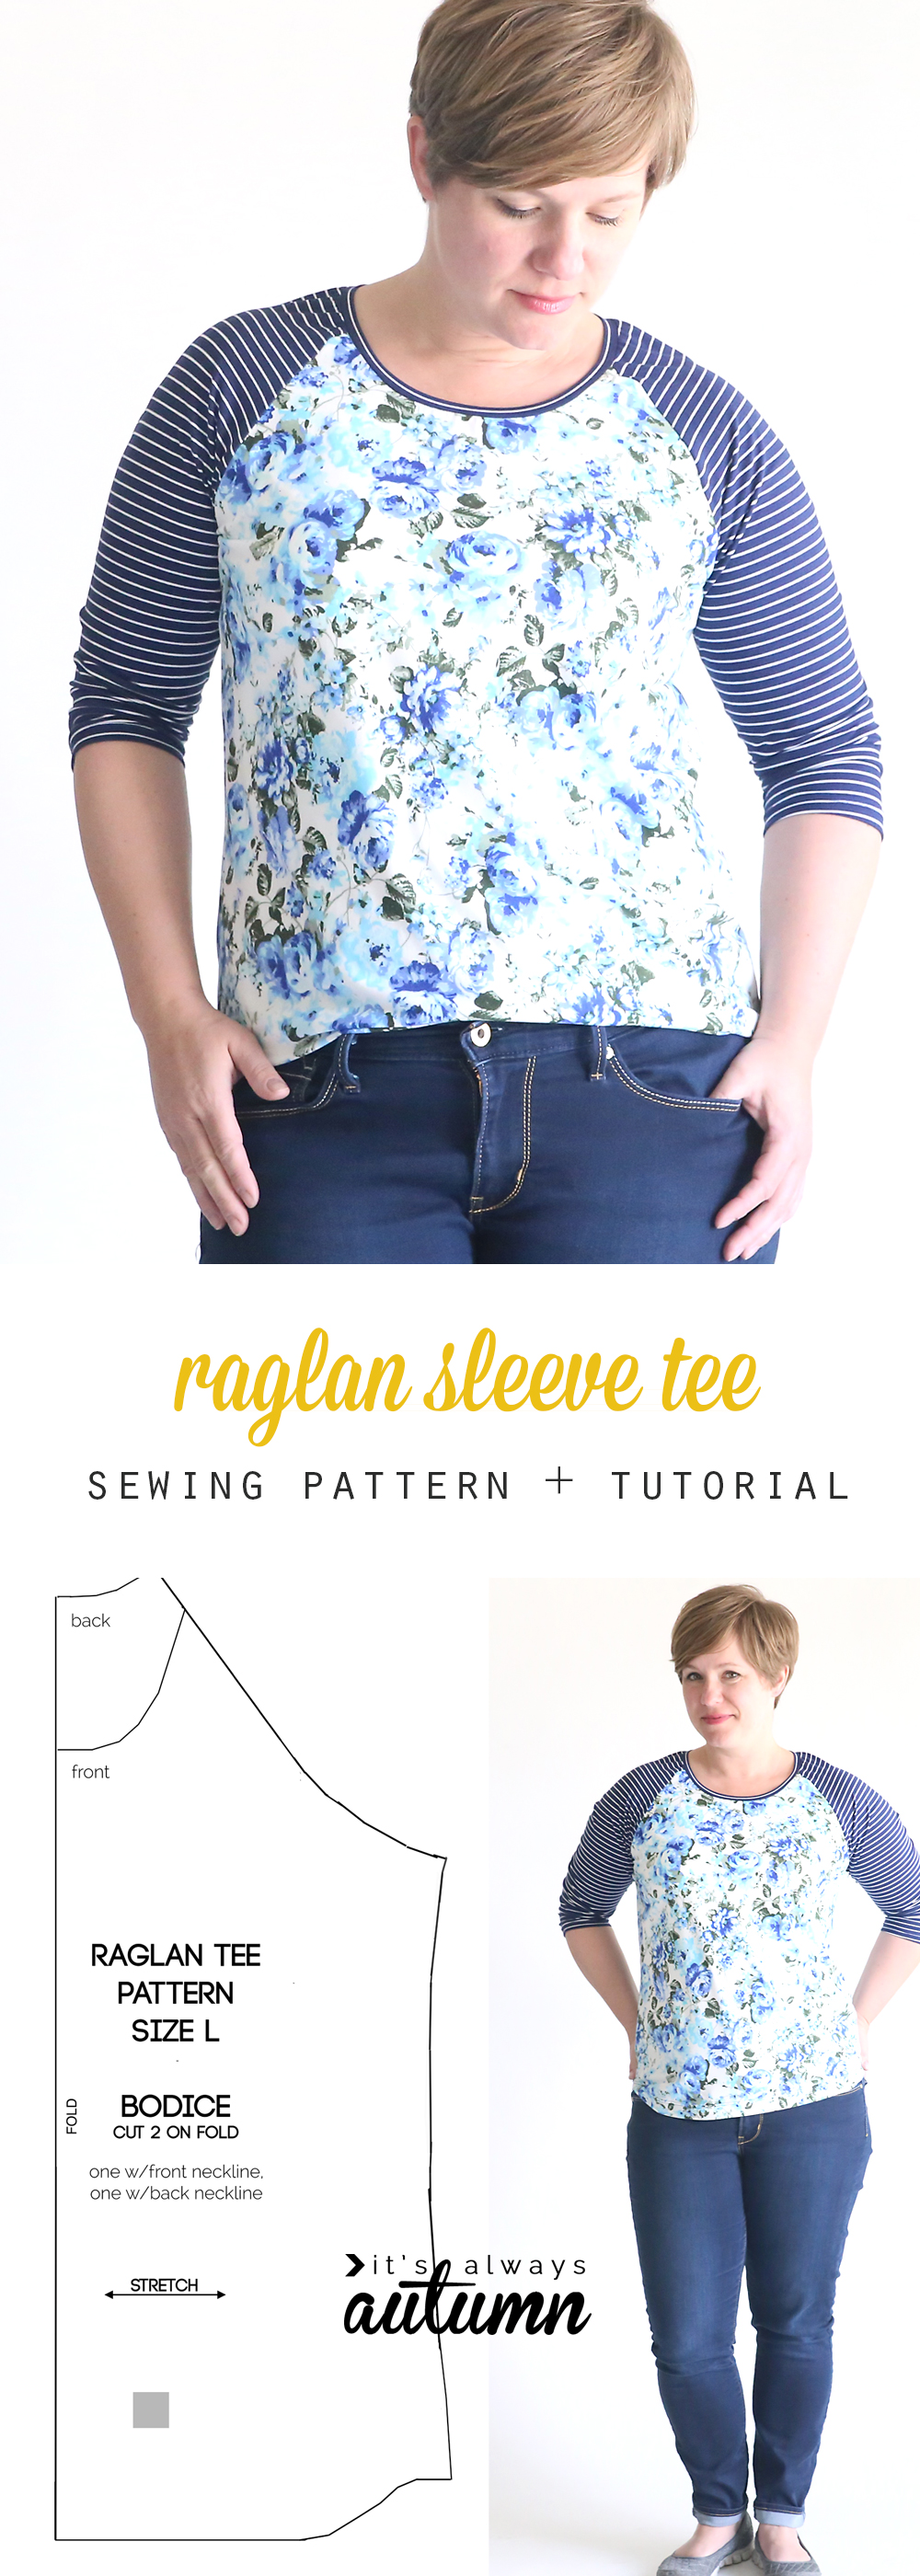 30 Gorgeous Free Sewing Patterns for Tops (Women)  Sewing patterns free  women, Diy sewing clothes, Clothes sewing patterns